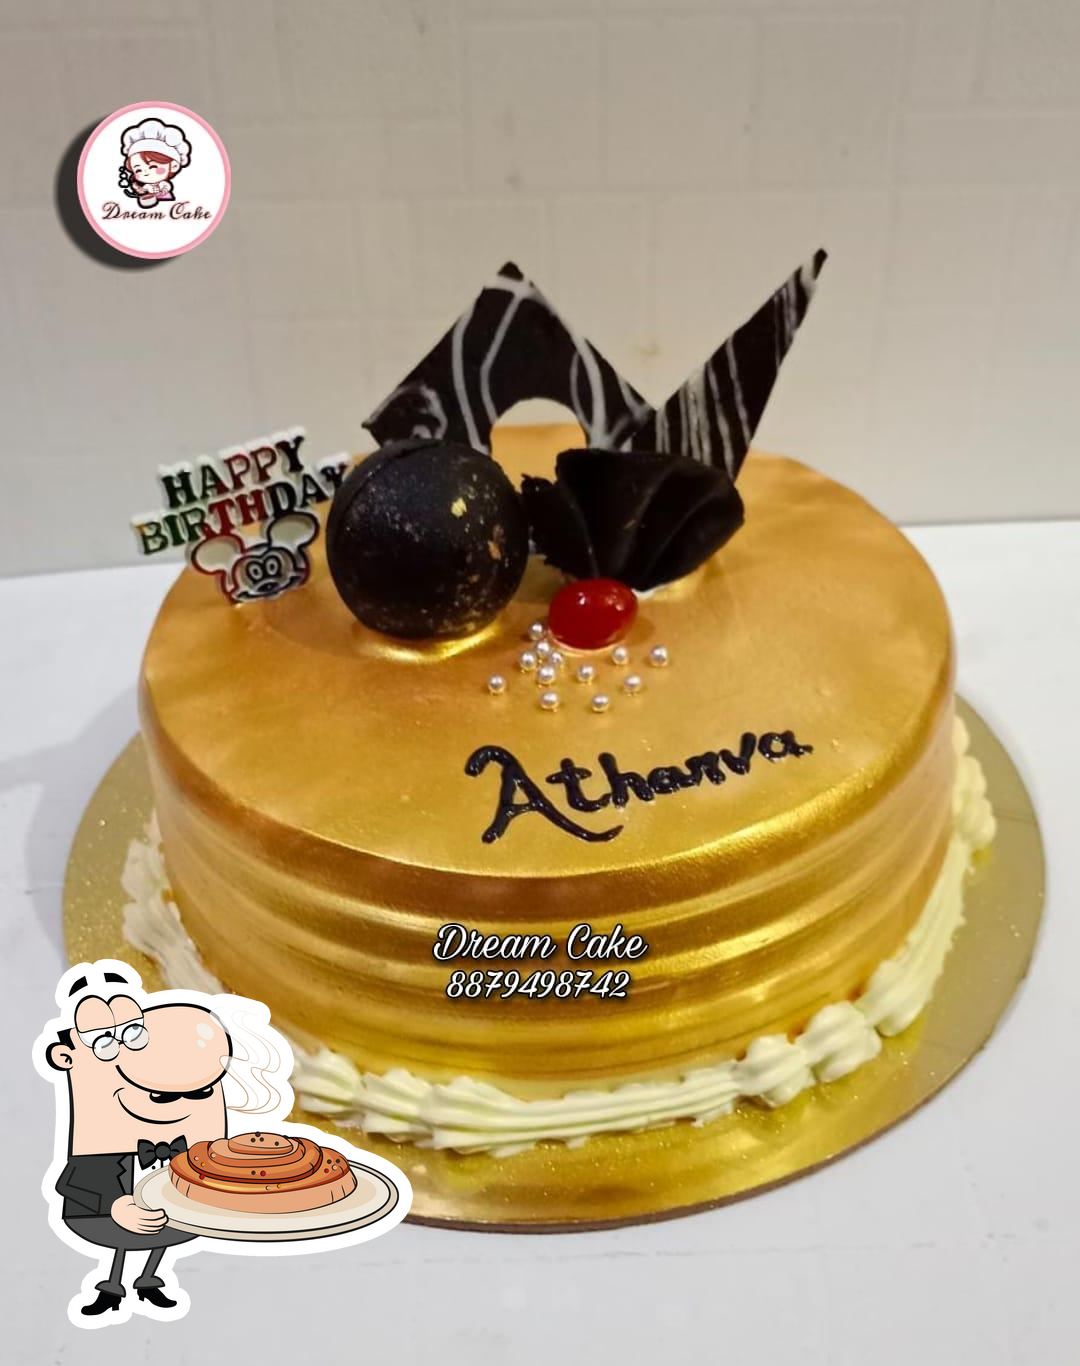 Reevih The Baking Girl - The pretty little cake for Atharva, who turned one  ❤ | Facebook